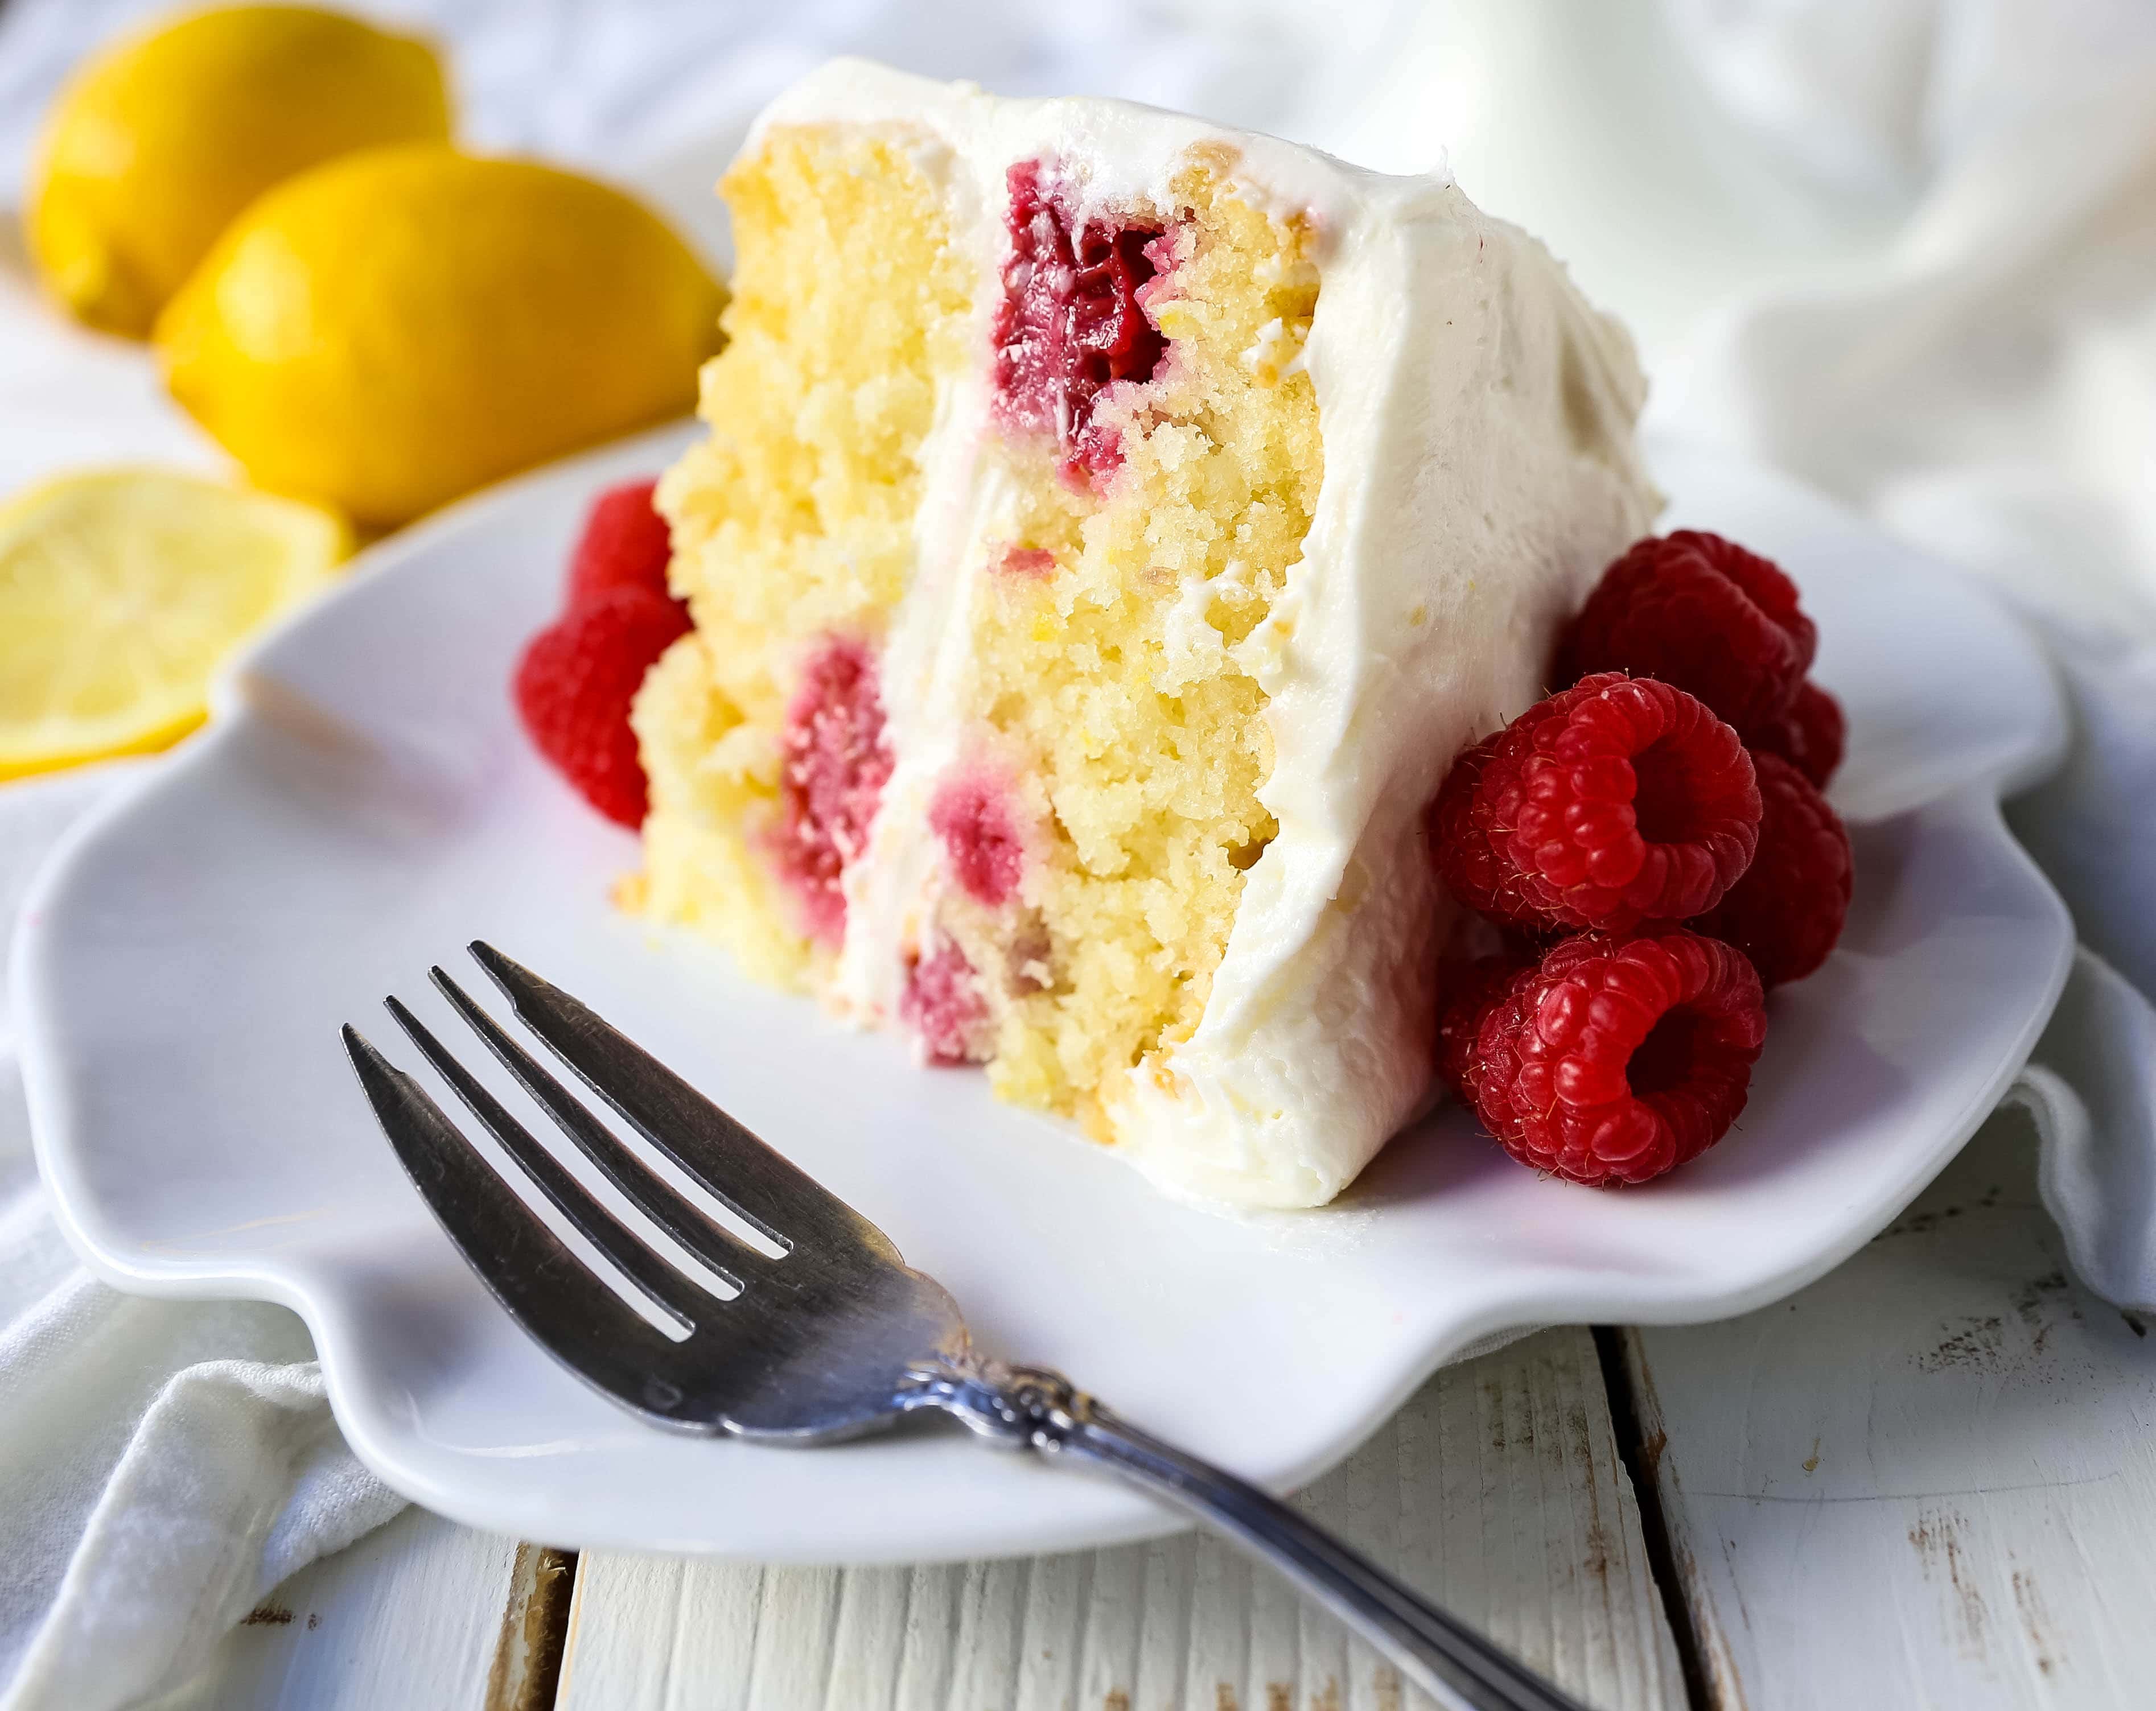 The Best Lemon Raspberry Cake. A light and fluffy lemon cake with fresh raspberries and a fresh lemon cream cheese frosting. A sweet and tangy lemon berry cake! #lemoncake #cake #lemonraspberrycake